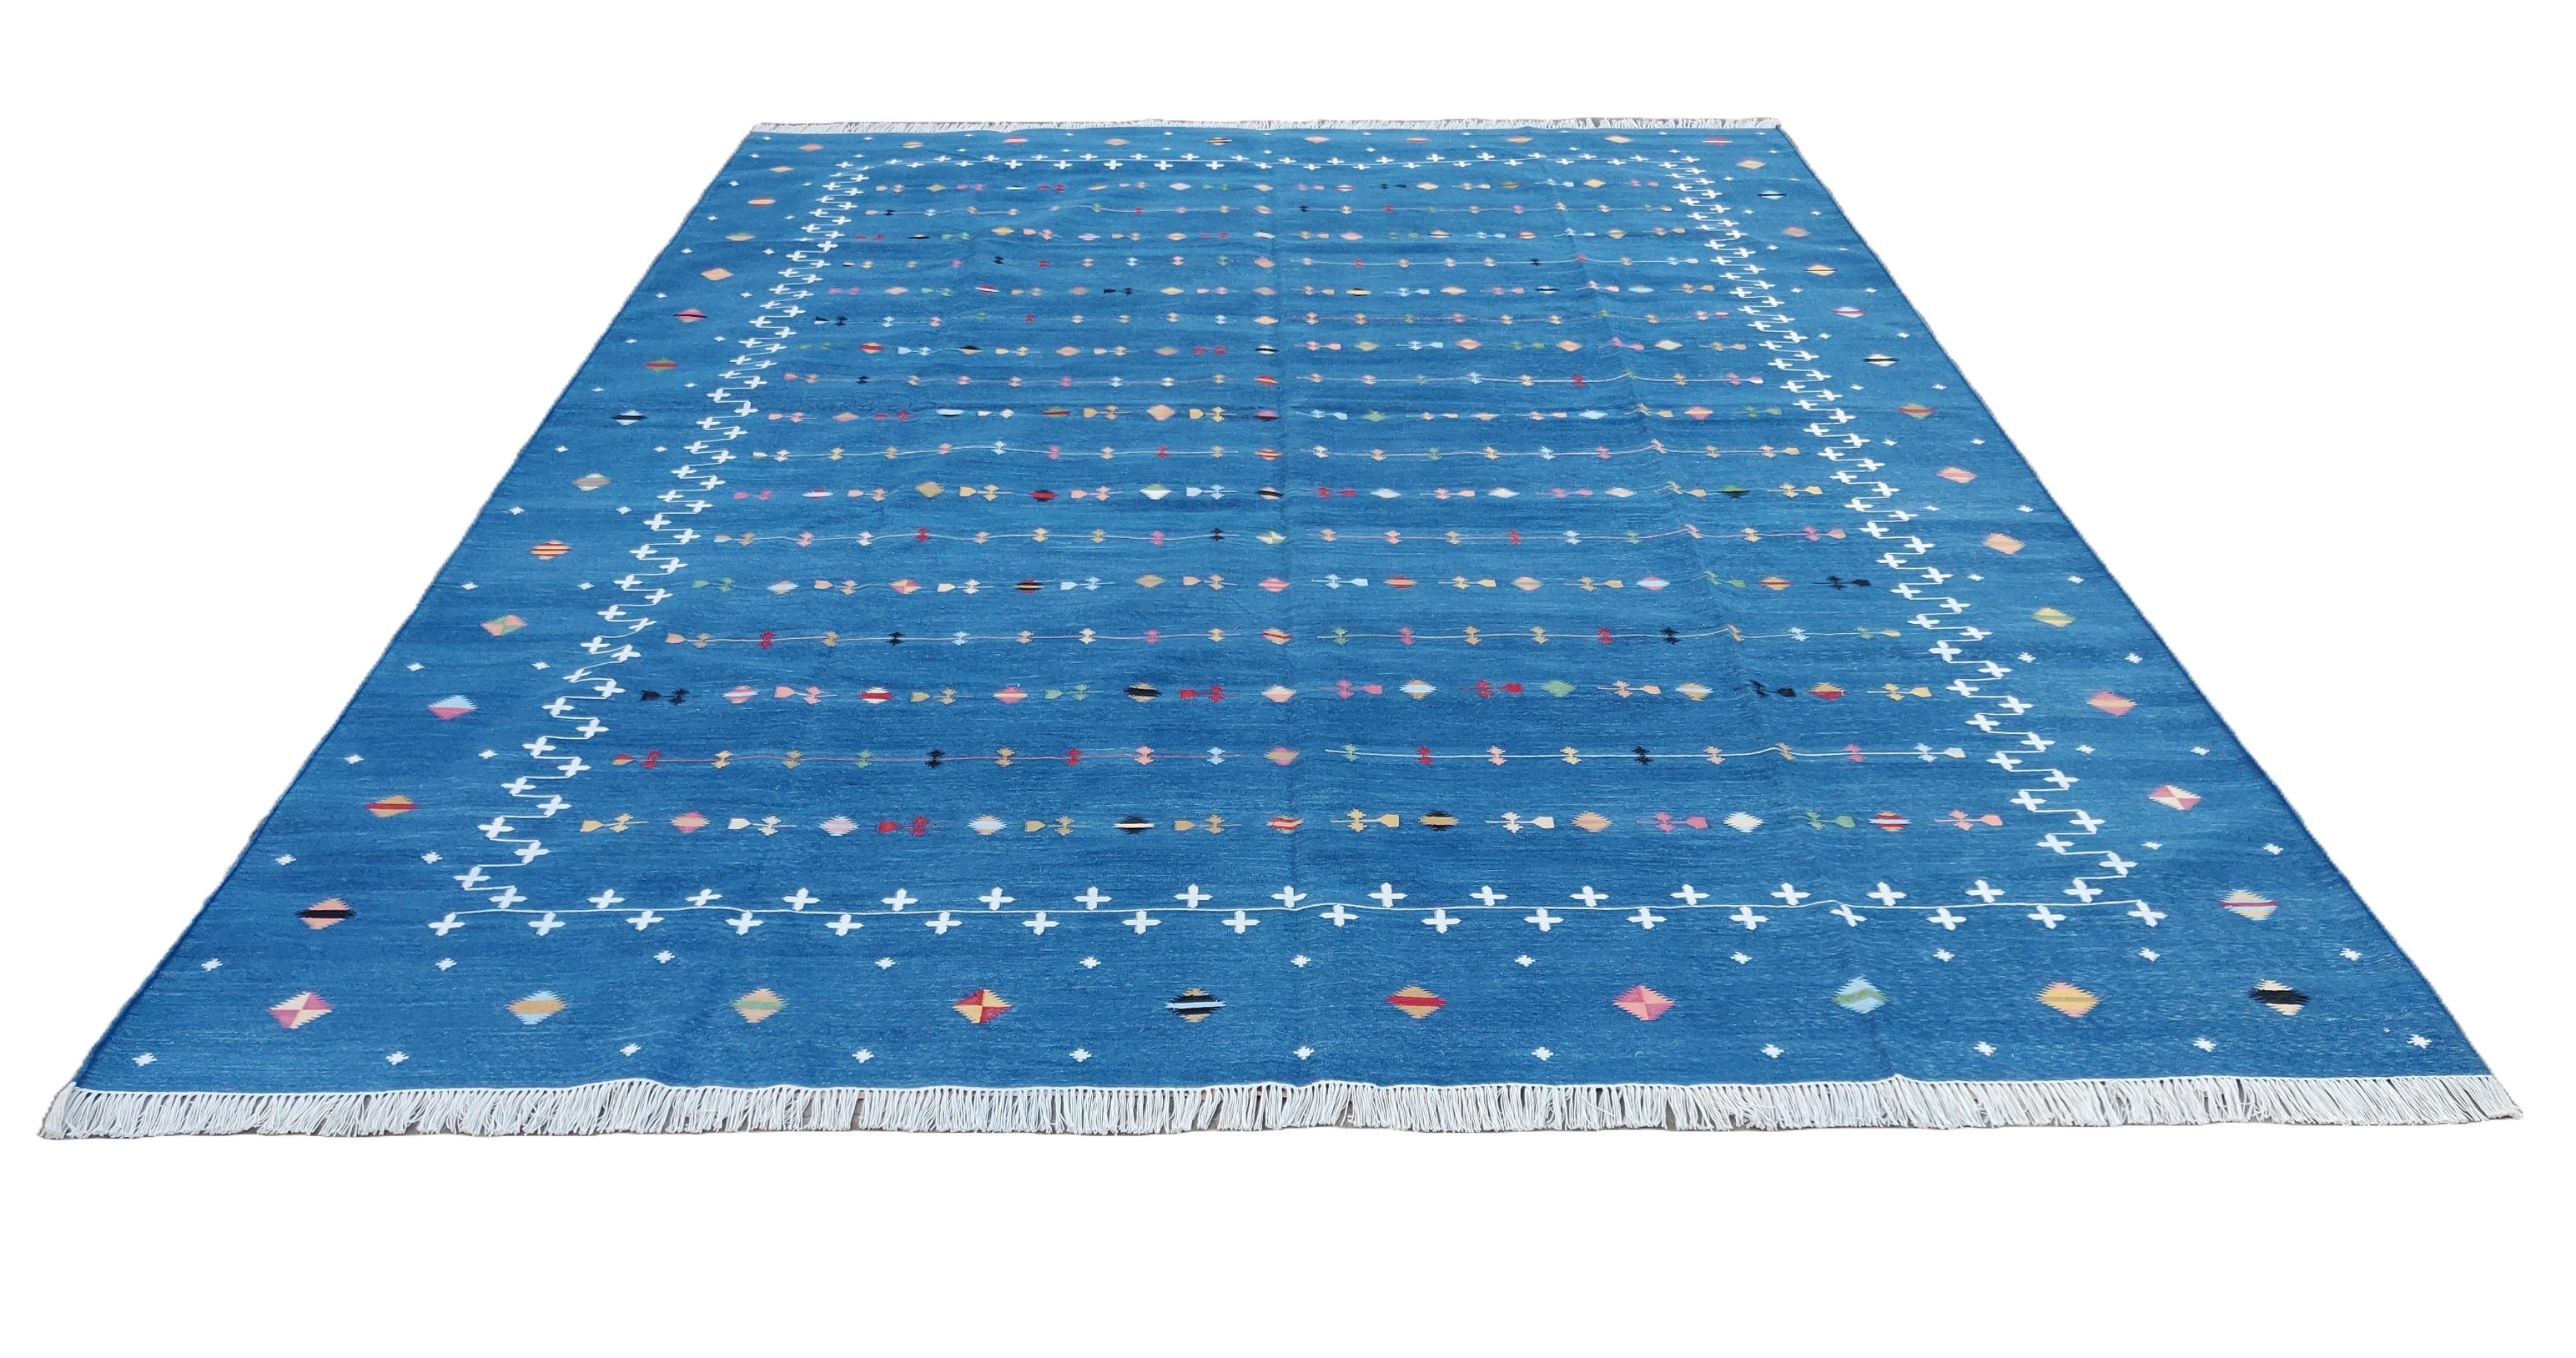 Hand-Woven Handmade Cotton Area Flat Weave Rug, 9x12 Blue And White Shooting Star Dhurrie For Sale